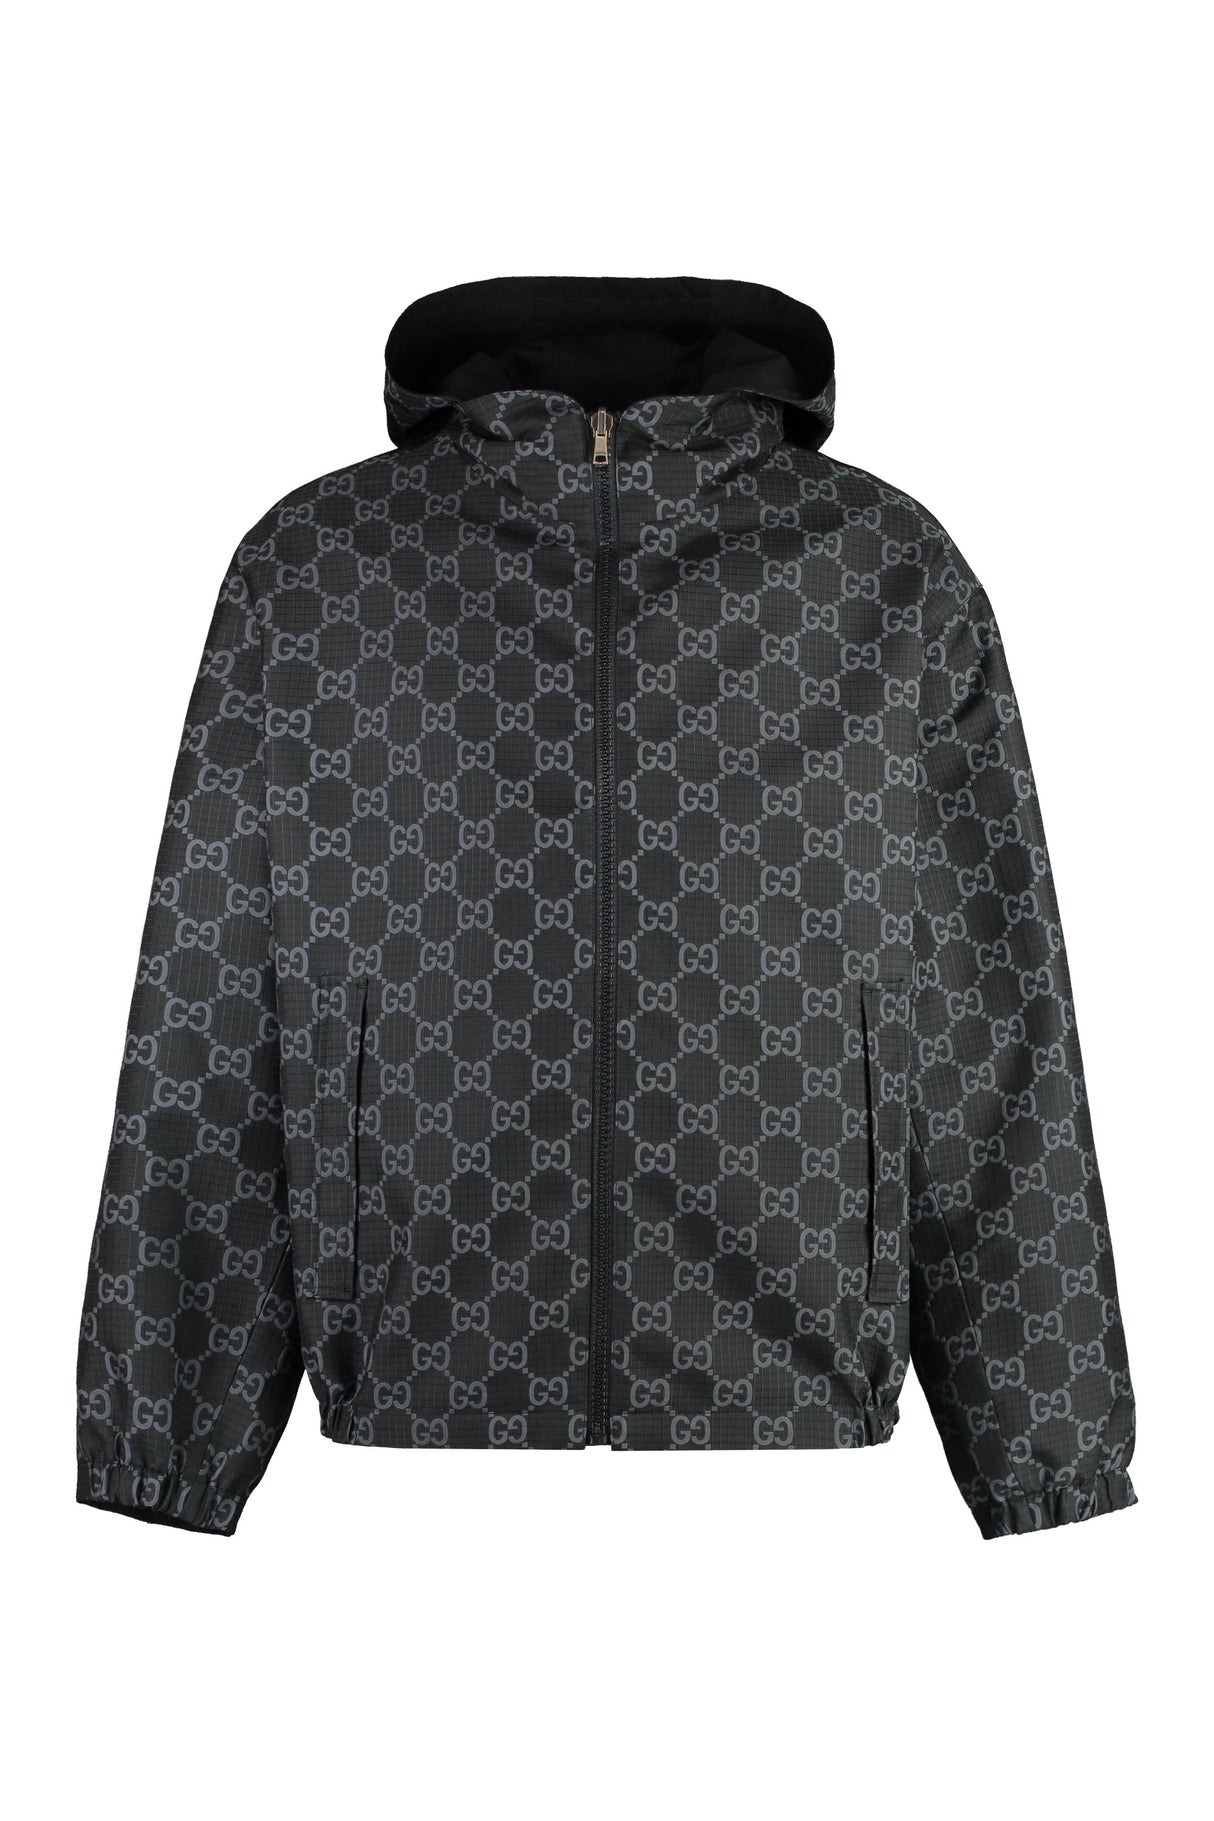 GUCCI Reversible Hooded Nylon Jacket with Leather Detail and Elastic Hemline for Men